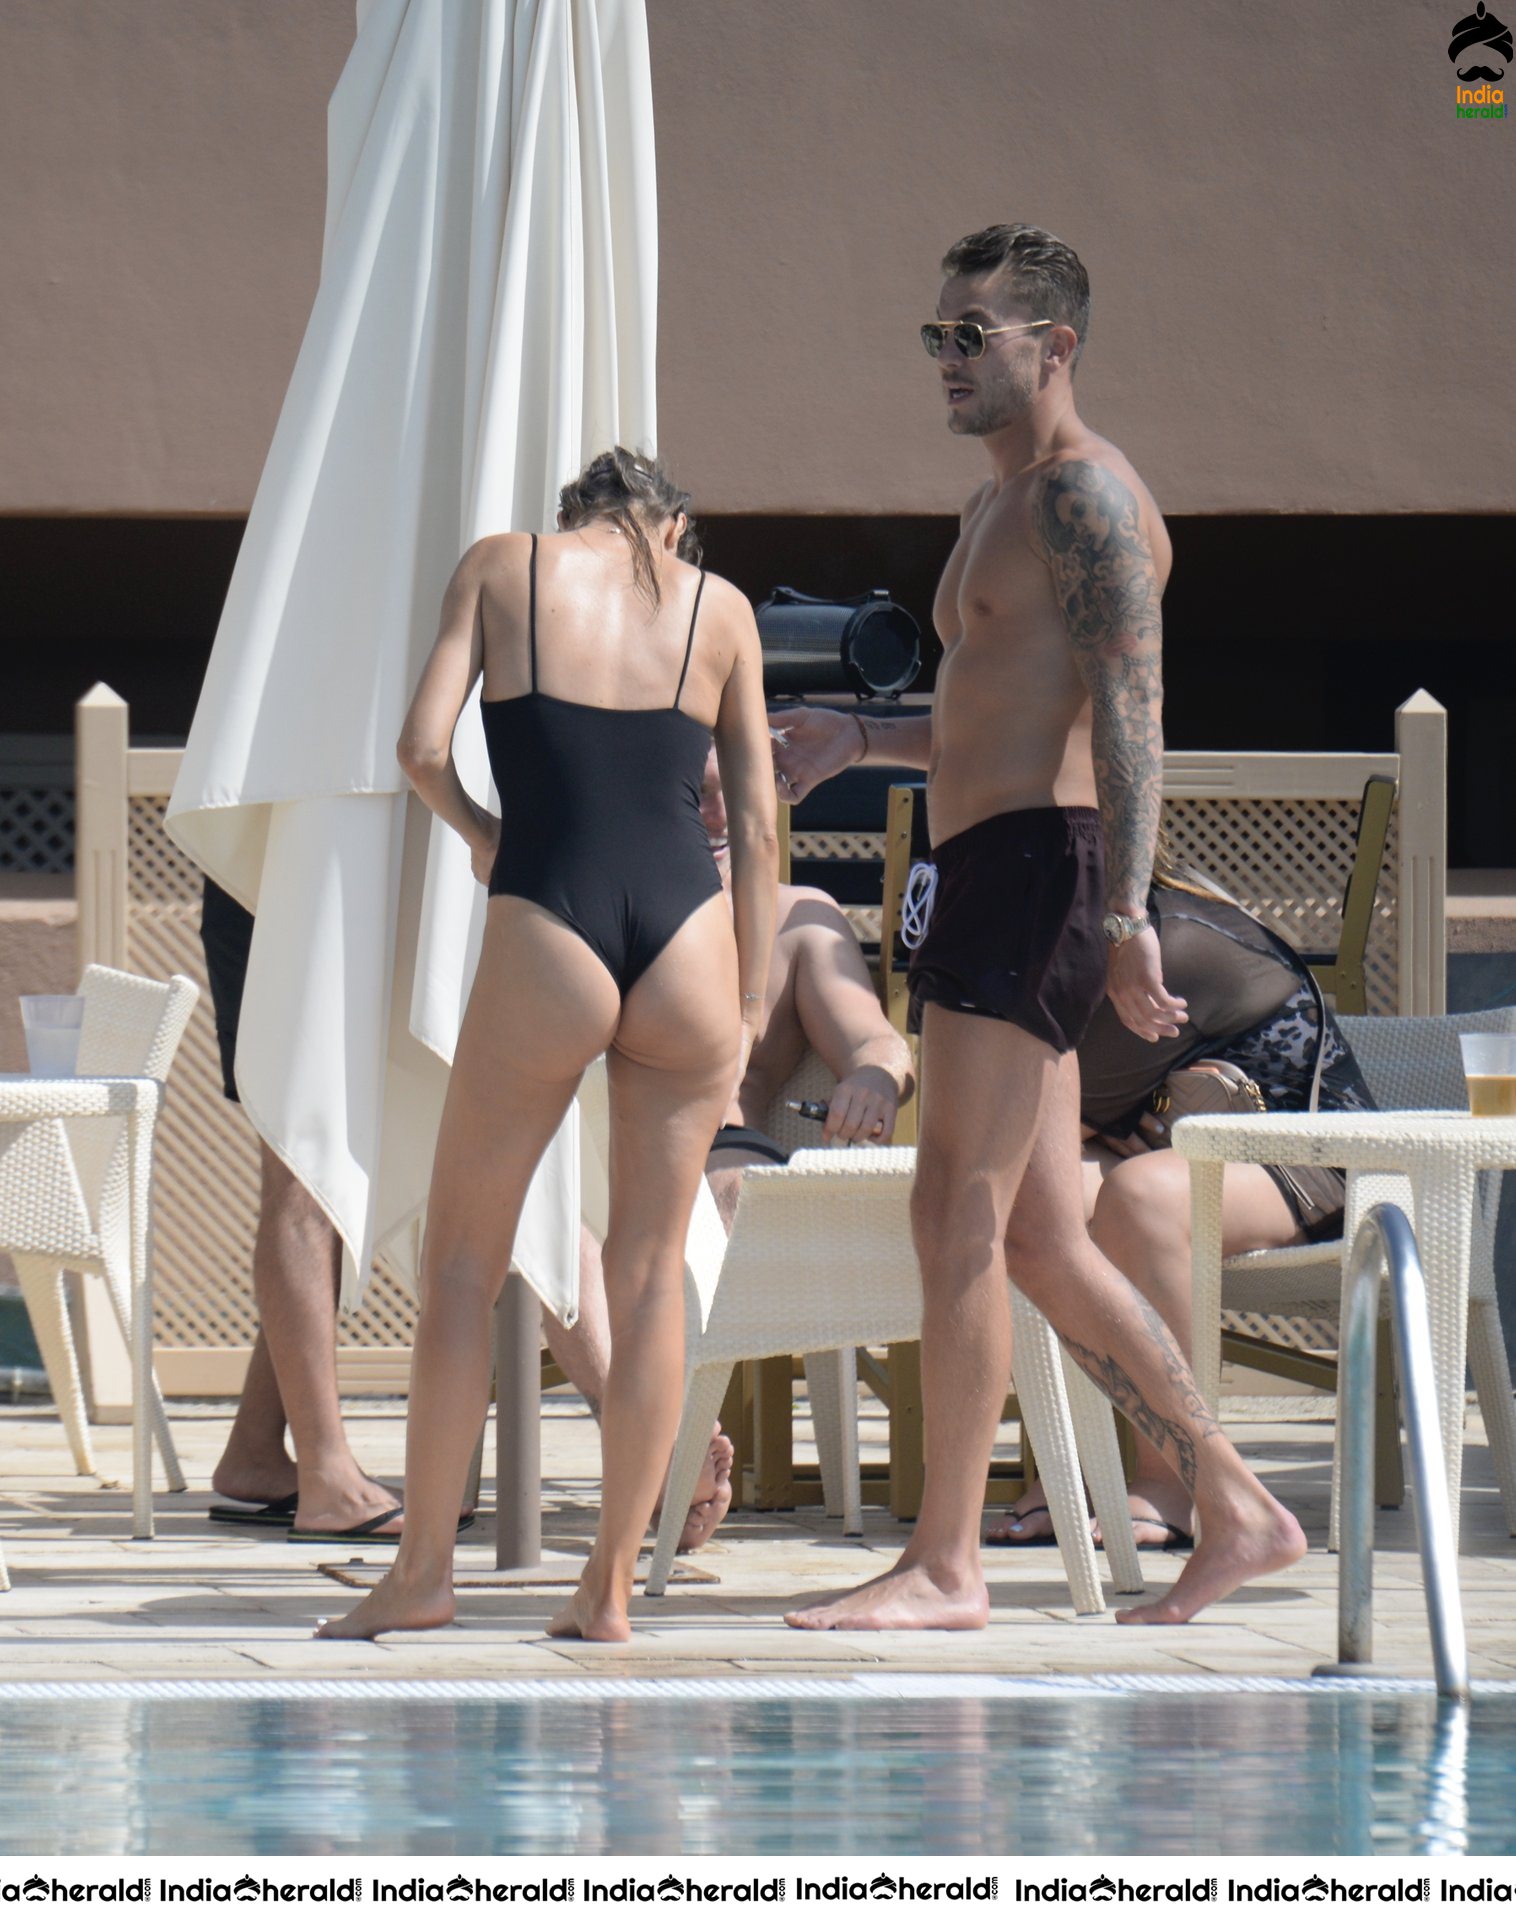 Chloe Sims in Bikini with her Boyfriend Sam Mucklow by the pool at a hotel in Marbella Set 2